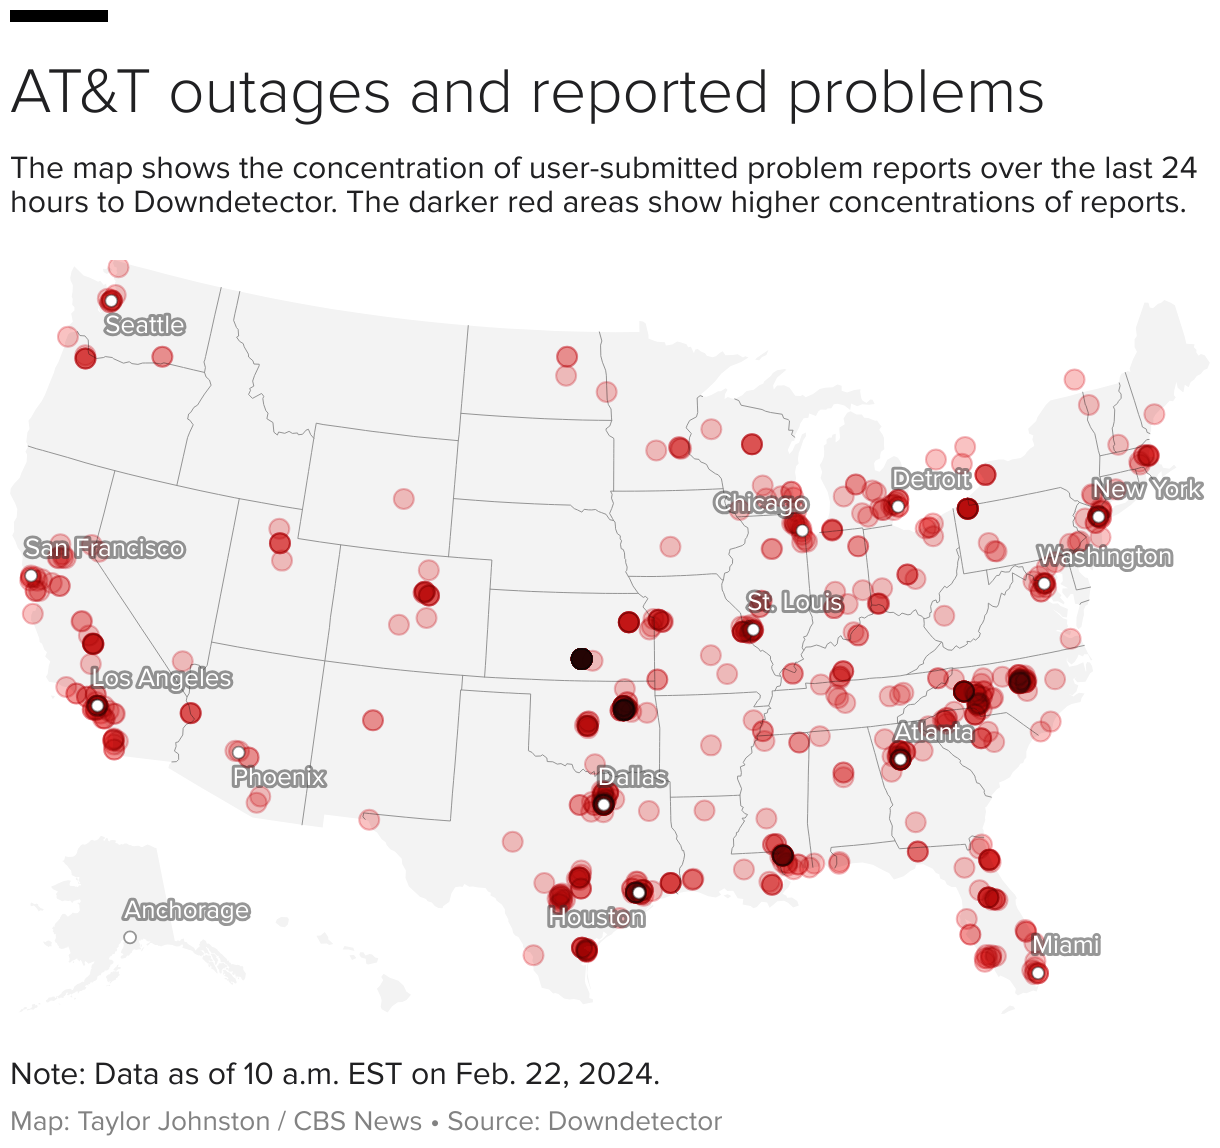 The outage map displays the areas where AT&T cellular service